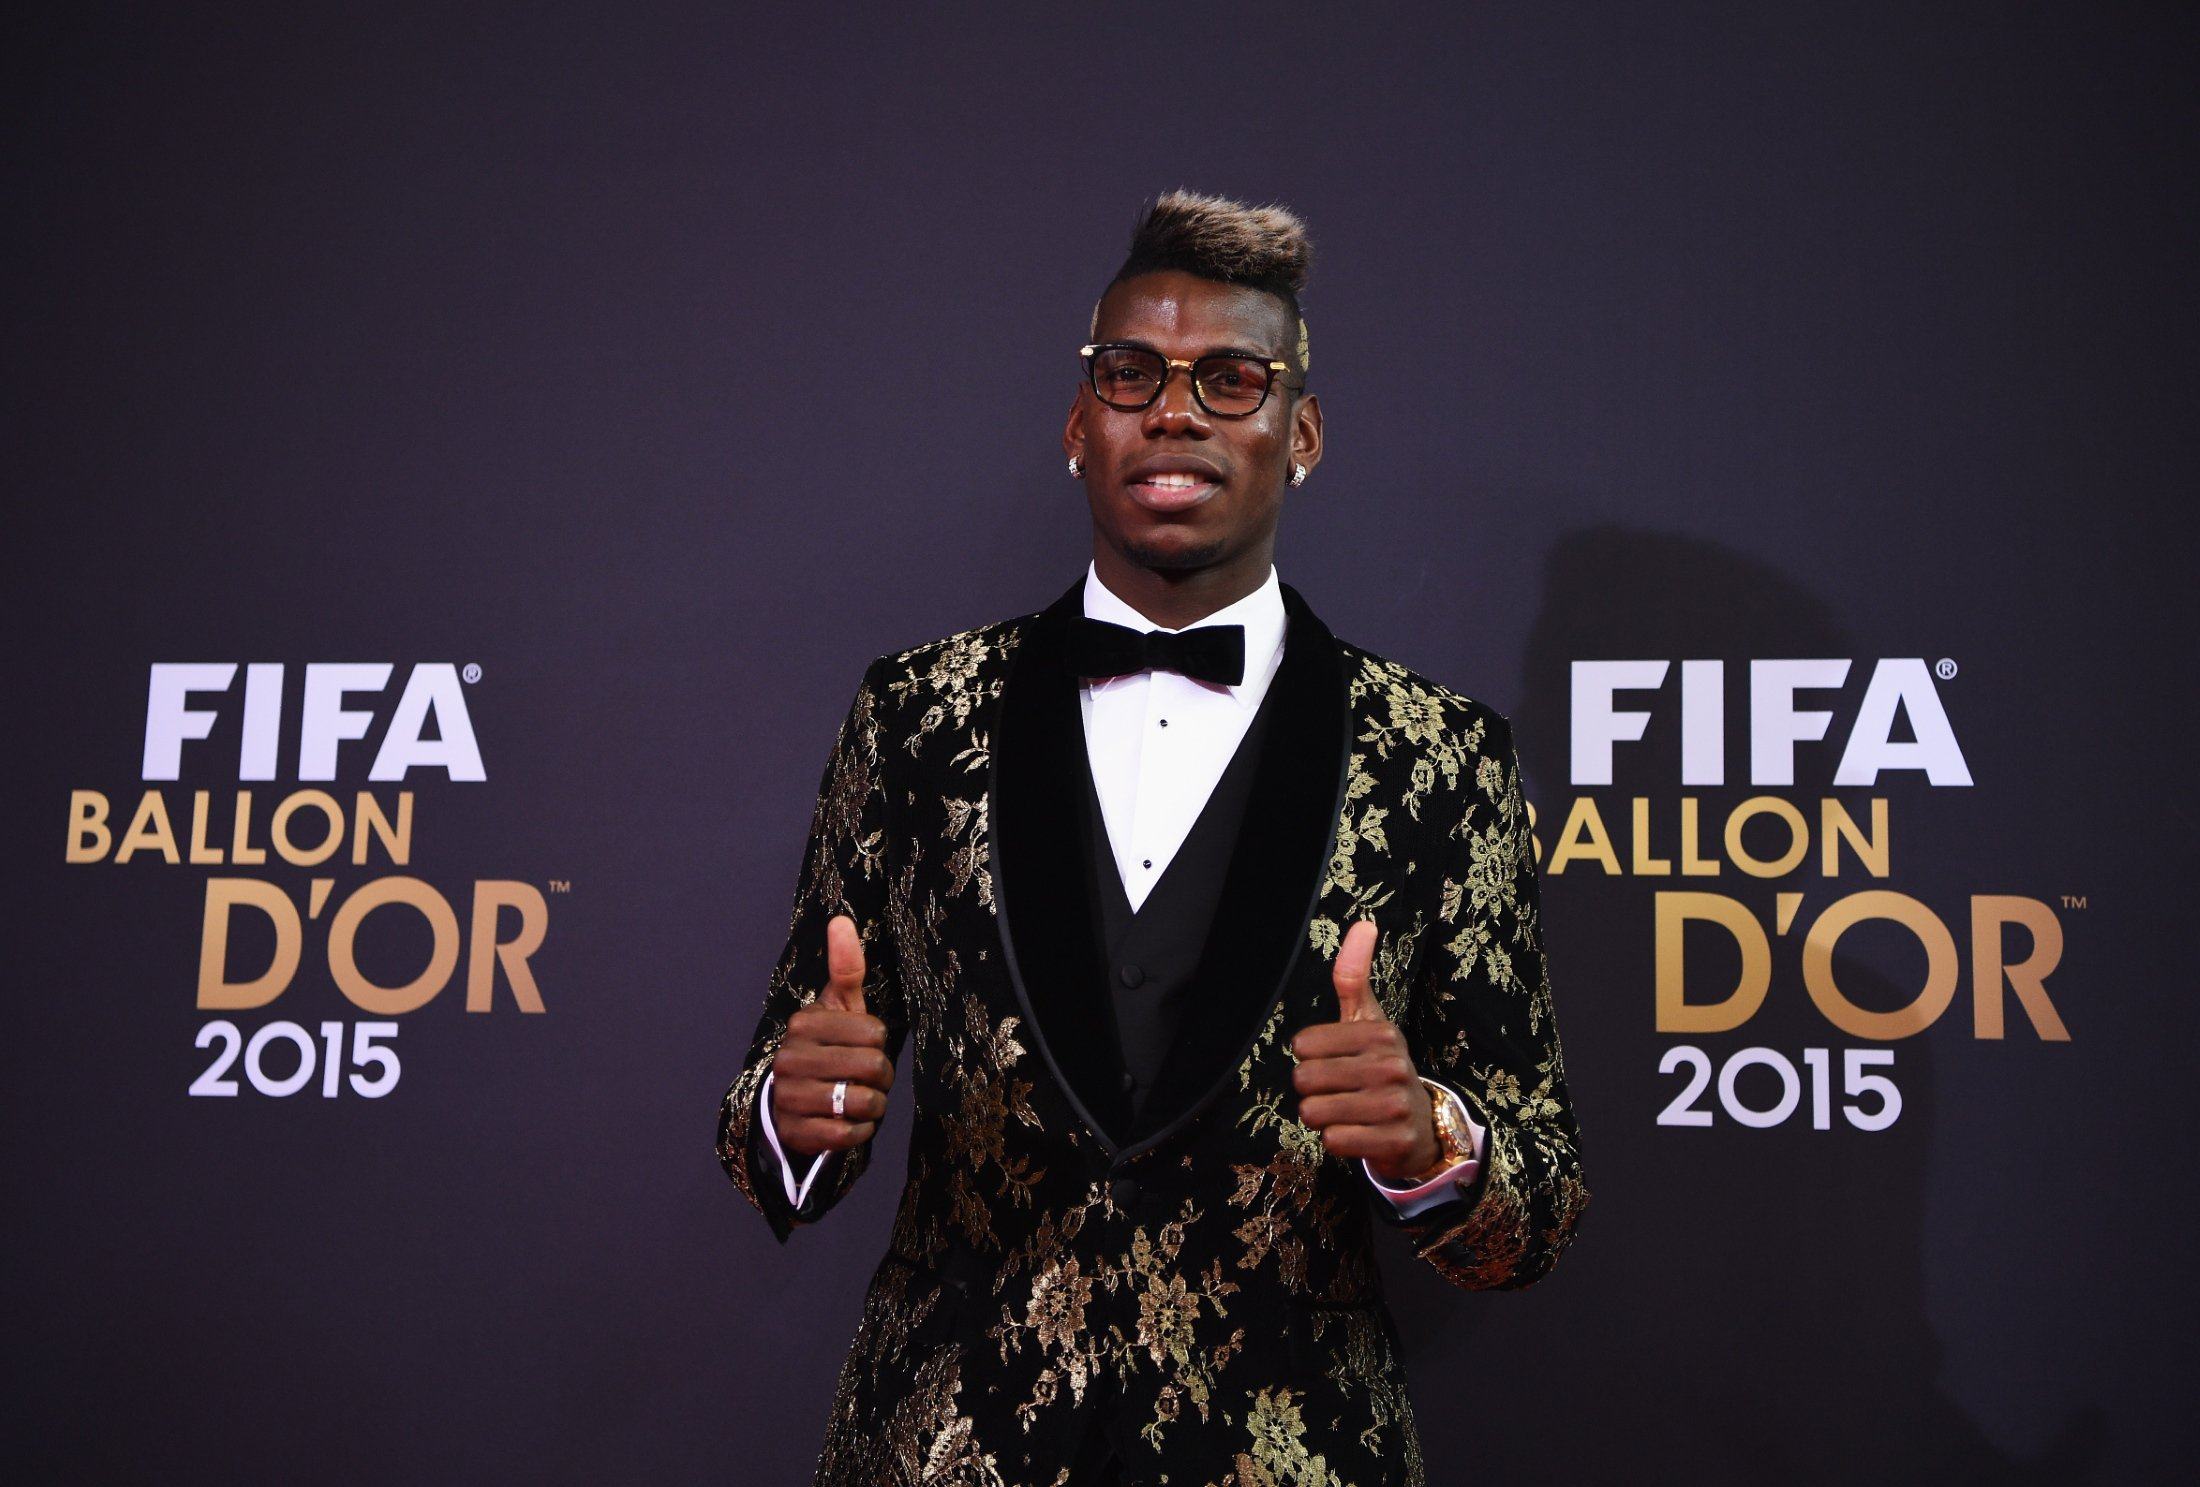 World Cup Qatar 2022: who are the best-dressed soccer players